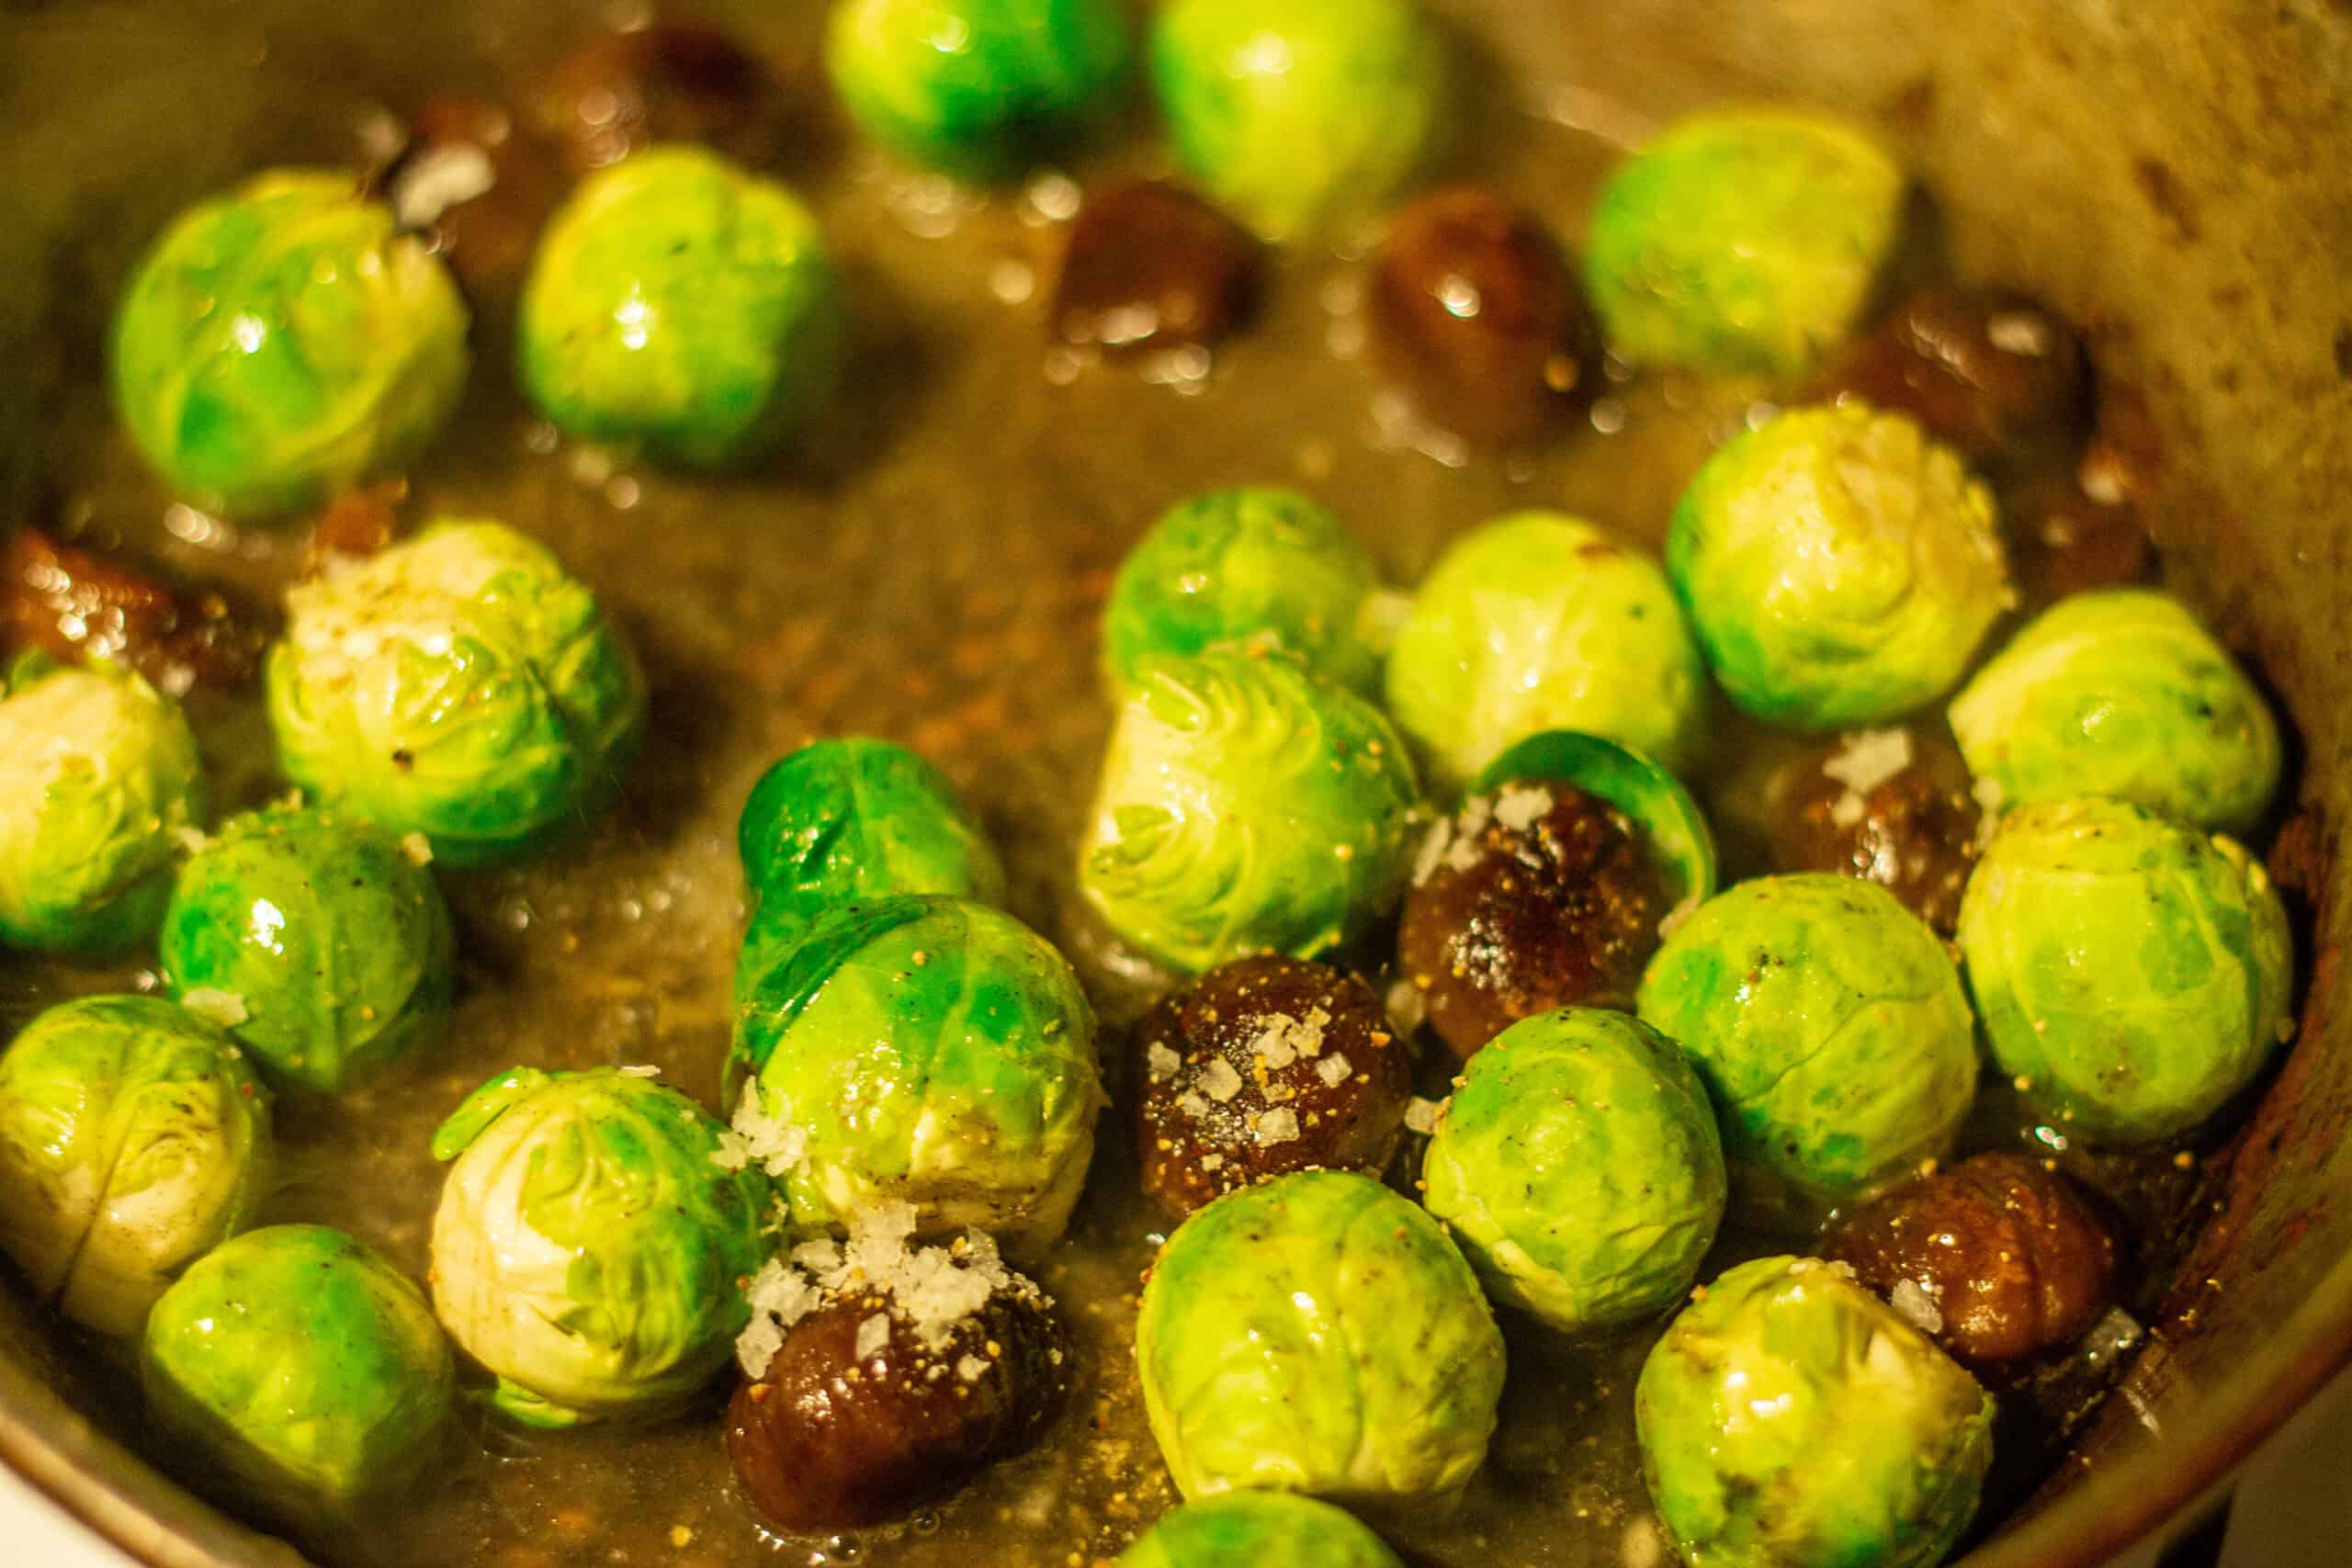 Braising brussels sprouts